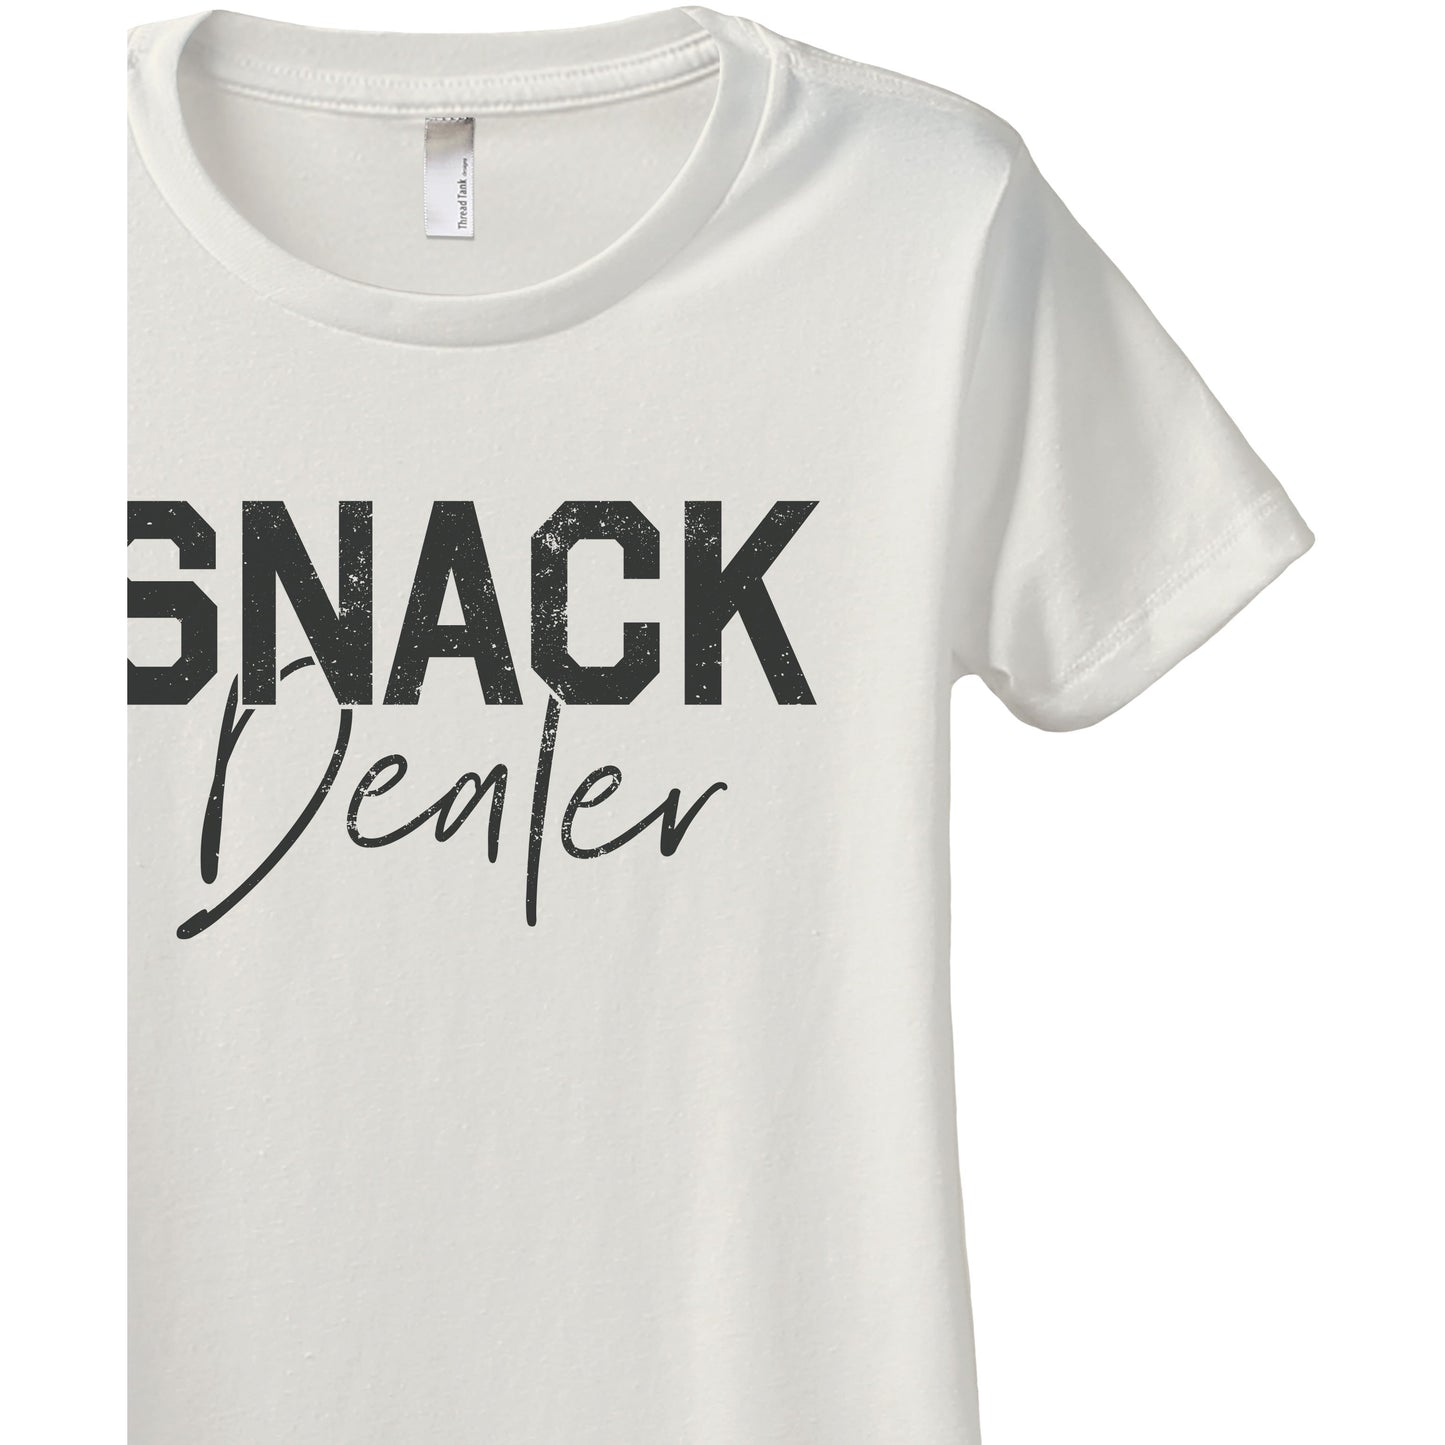 Snack Dealer - Stories You Can Wear